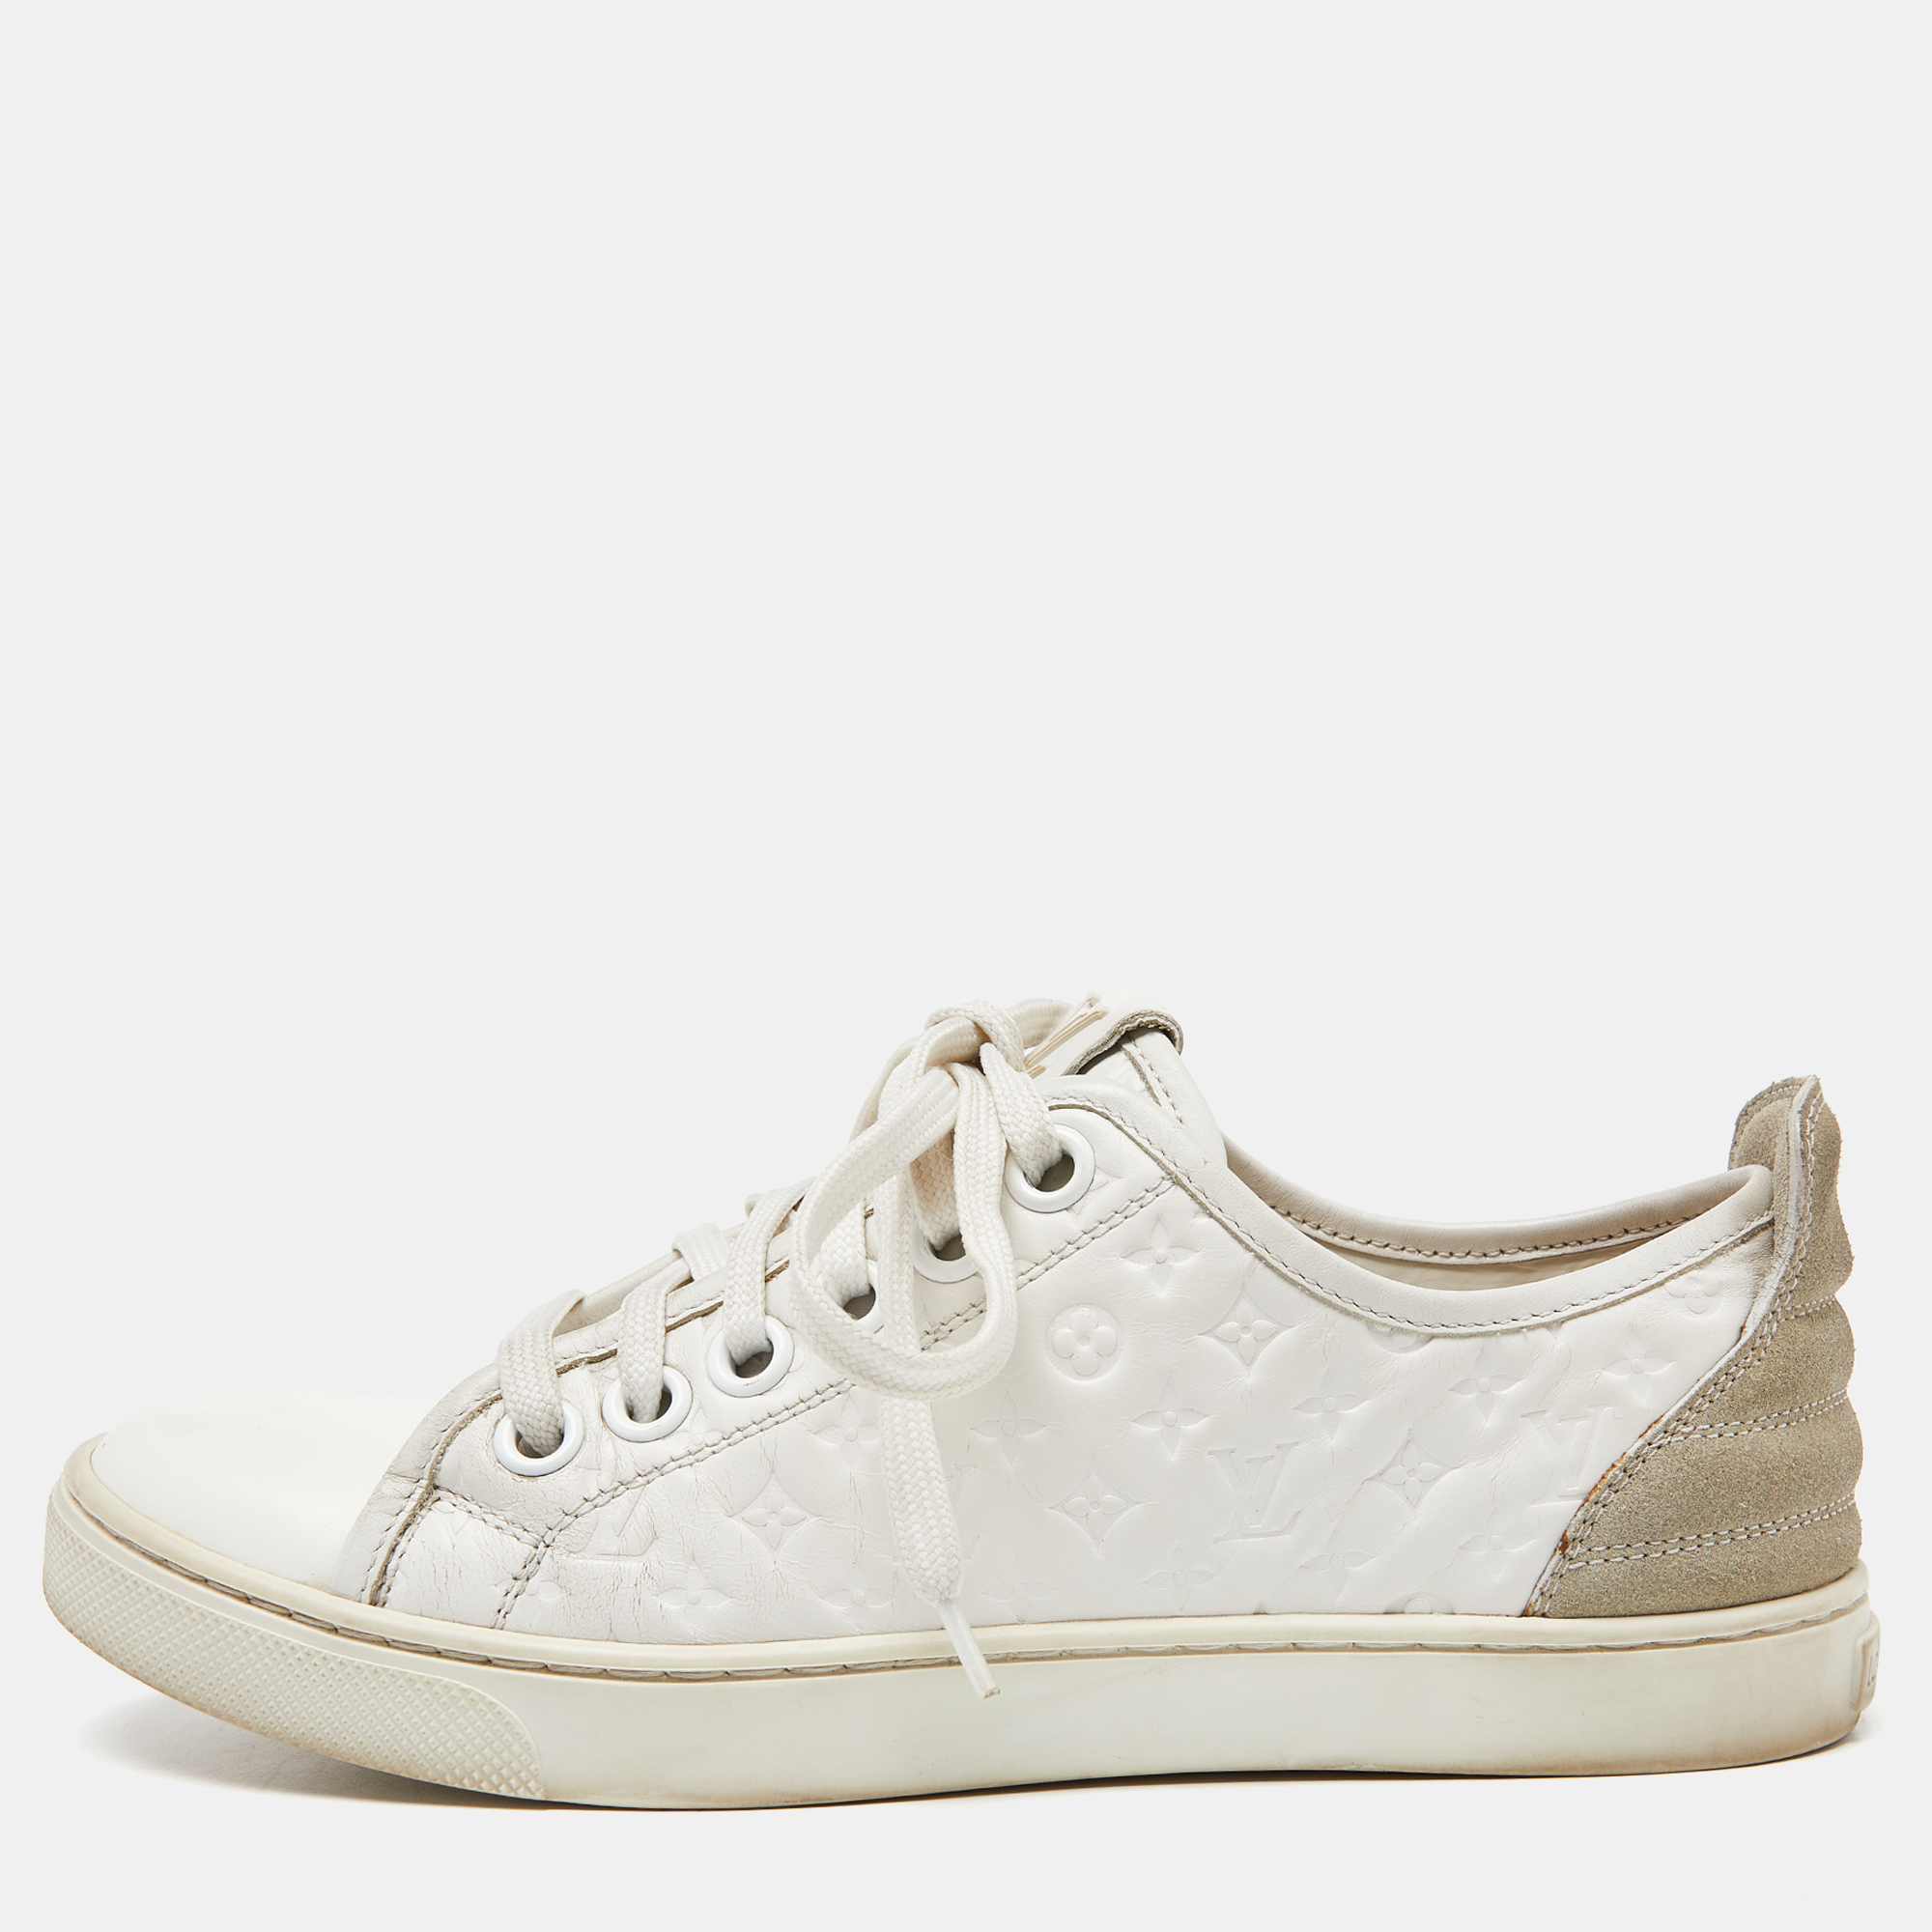 Louis vuitton white monogram leather and suede low top sneakers size 35